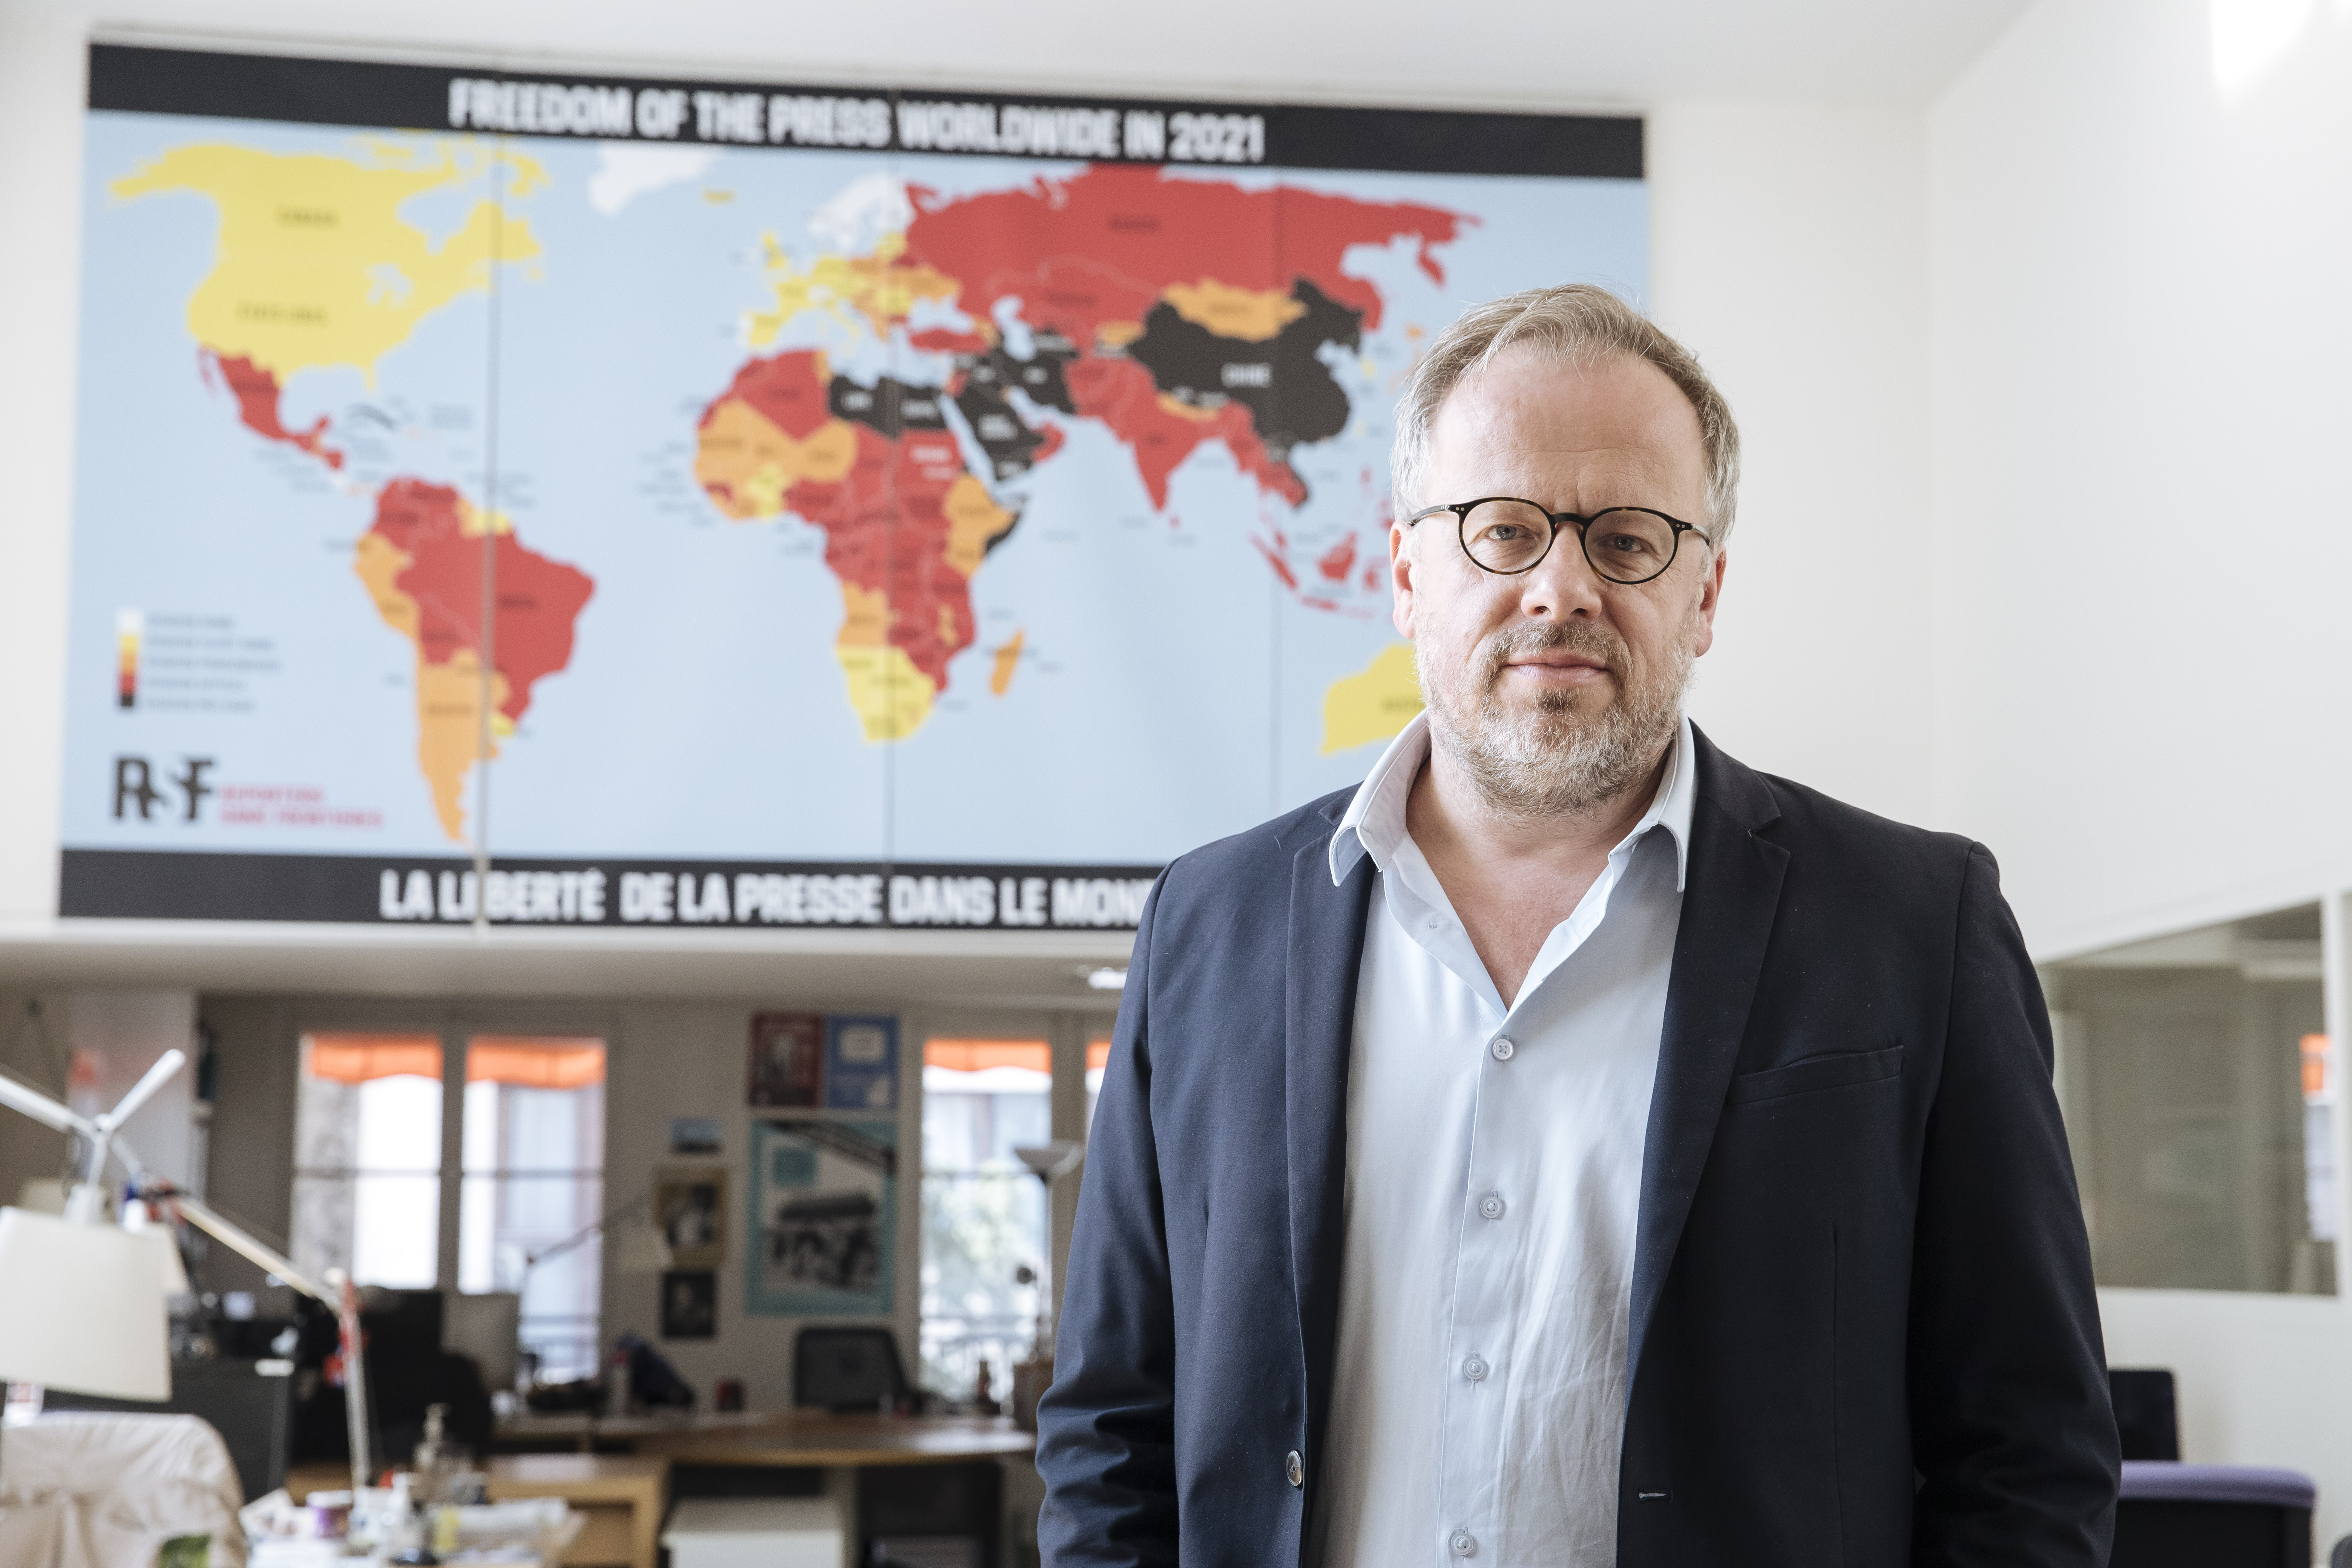 Christophe Deloire, head of RSF (Reporters without borders) stands in front of the 2021 map of press freedom in Paris, France, Tuesday April, 20, 2021. Reporters Without Borders says there has been a "dramatic deterioration" of press freedom since the pandemic tore across the world. Its new World Press Freedom Index evaluated the media in 180 countries and painted a stark picture. The group says in its annual report that 73% of nations have serious issues with media freedom. It says countries have used the pandemic "as grounds to block journalists' access to information, sources and reporting in the field." The media watchdog says it is particularly true for governments in Asia, the Mideast and Europe. (AP Photo/Lewis Joly)